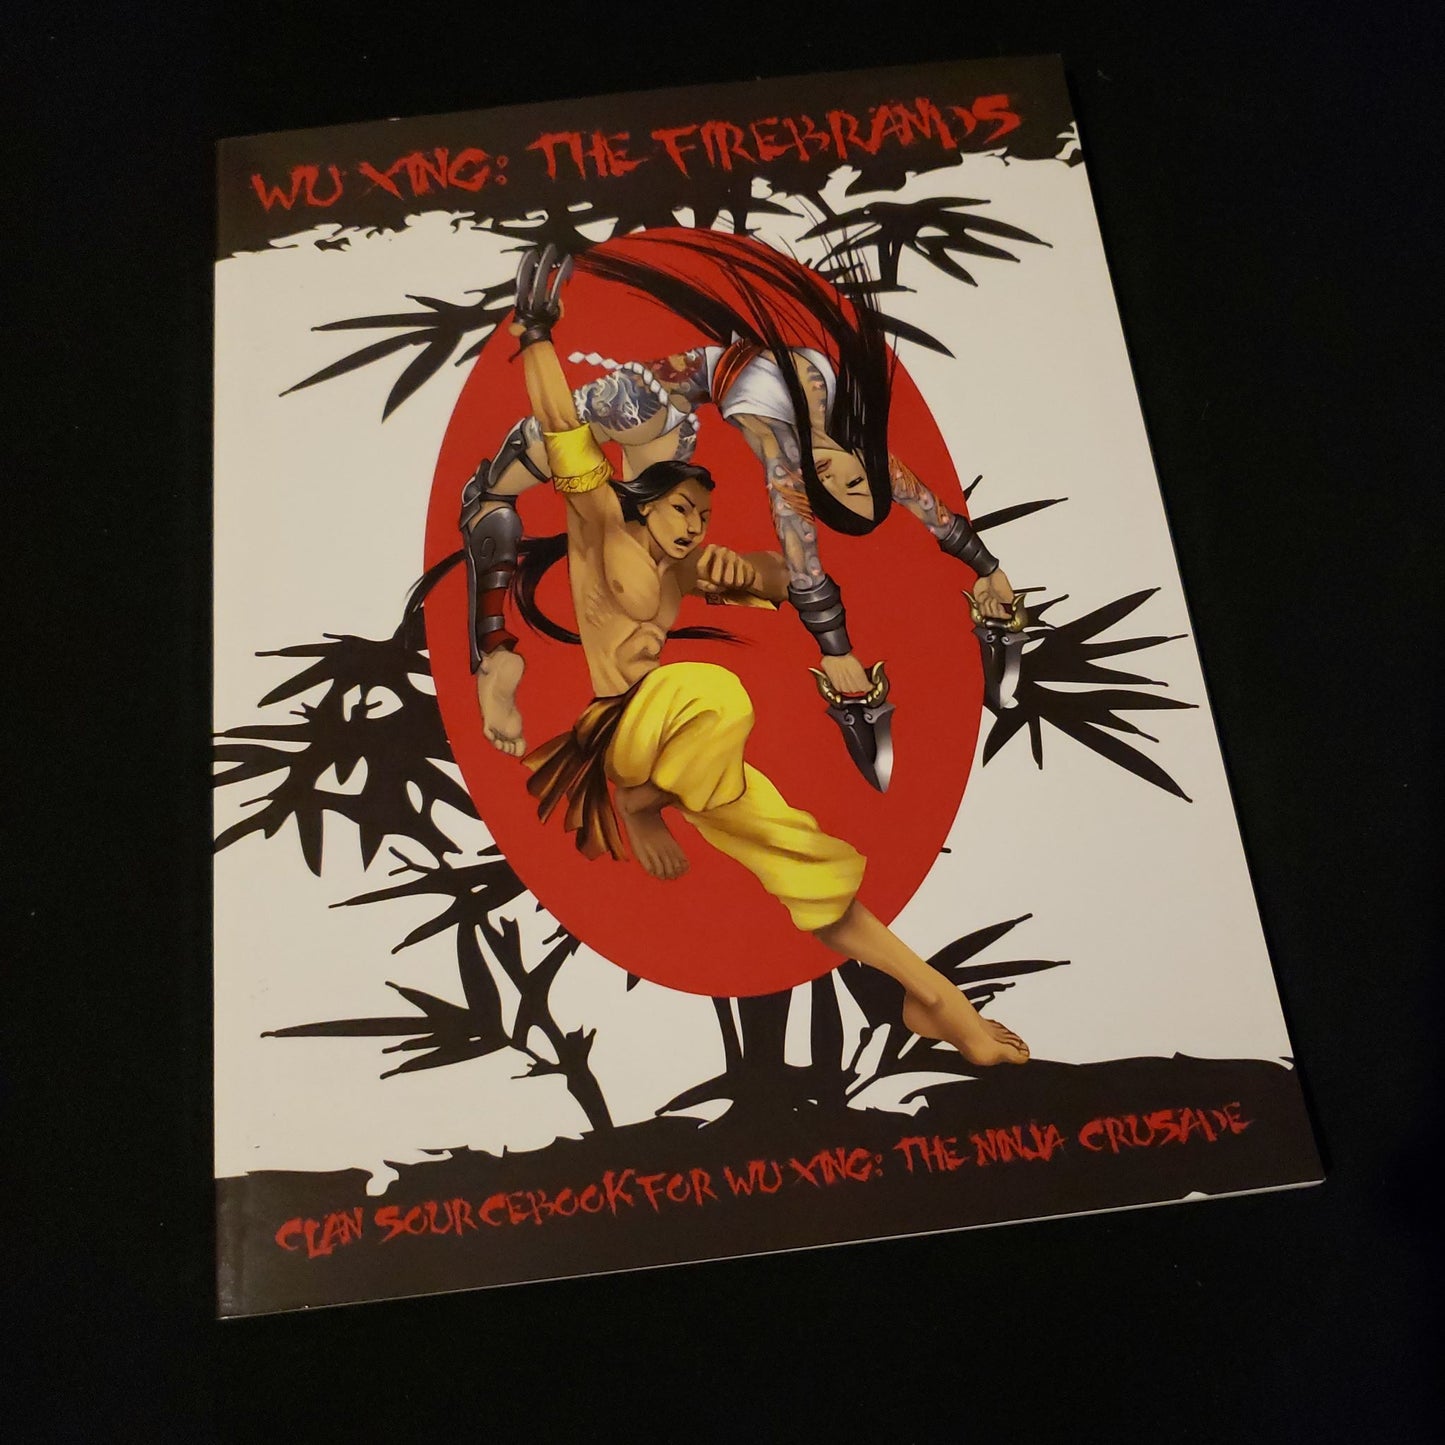 Image shows the front cover of the Firebrands clan book for the Wu Xing: The Ninja Crusade roleplaying game